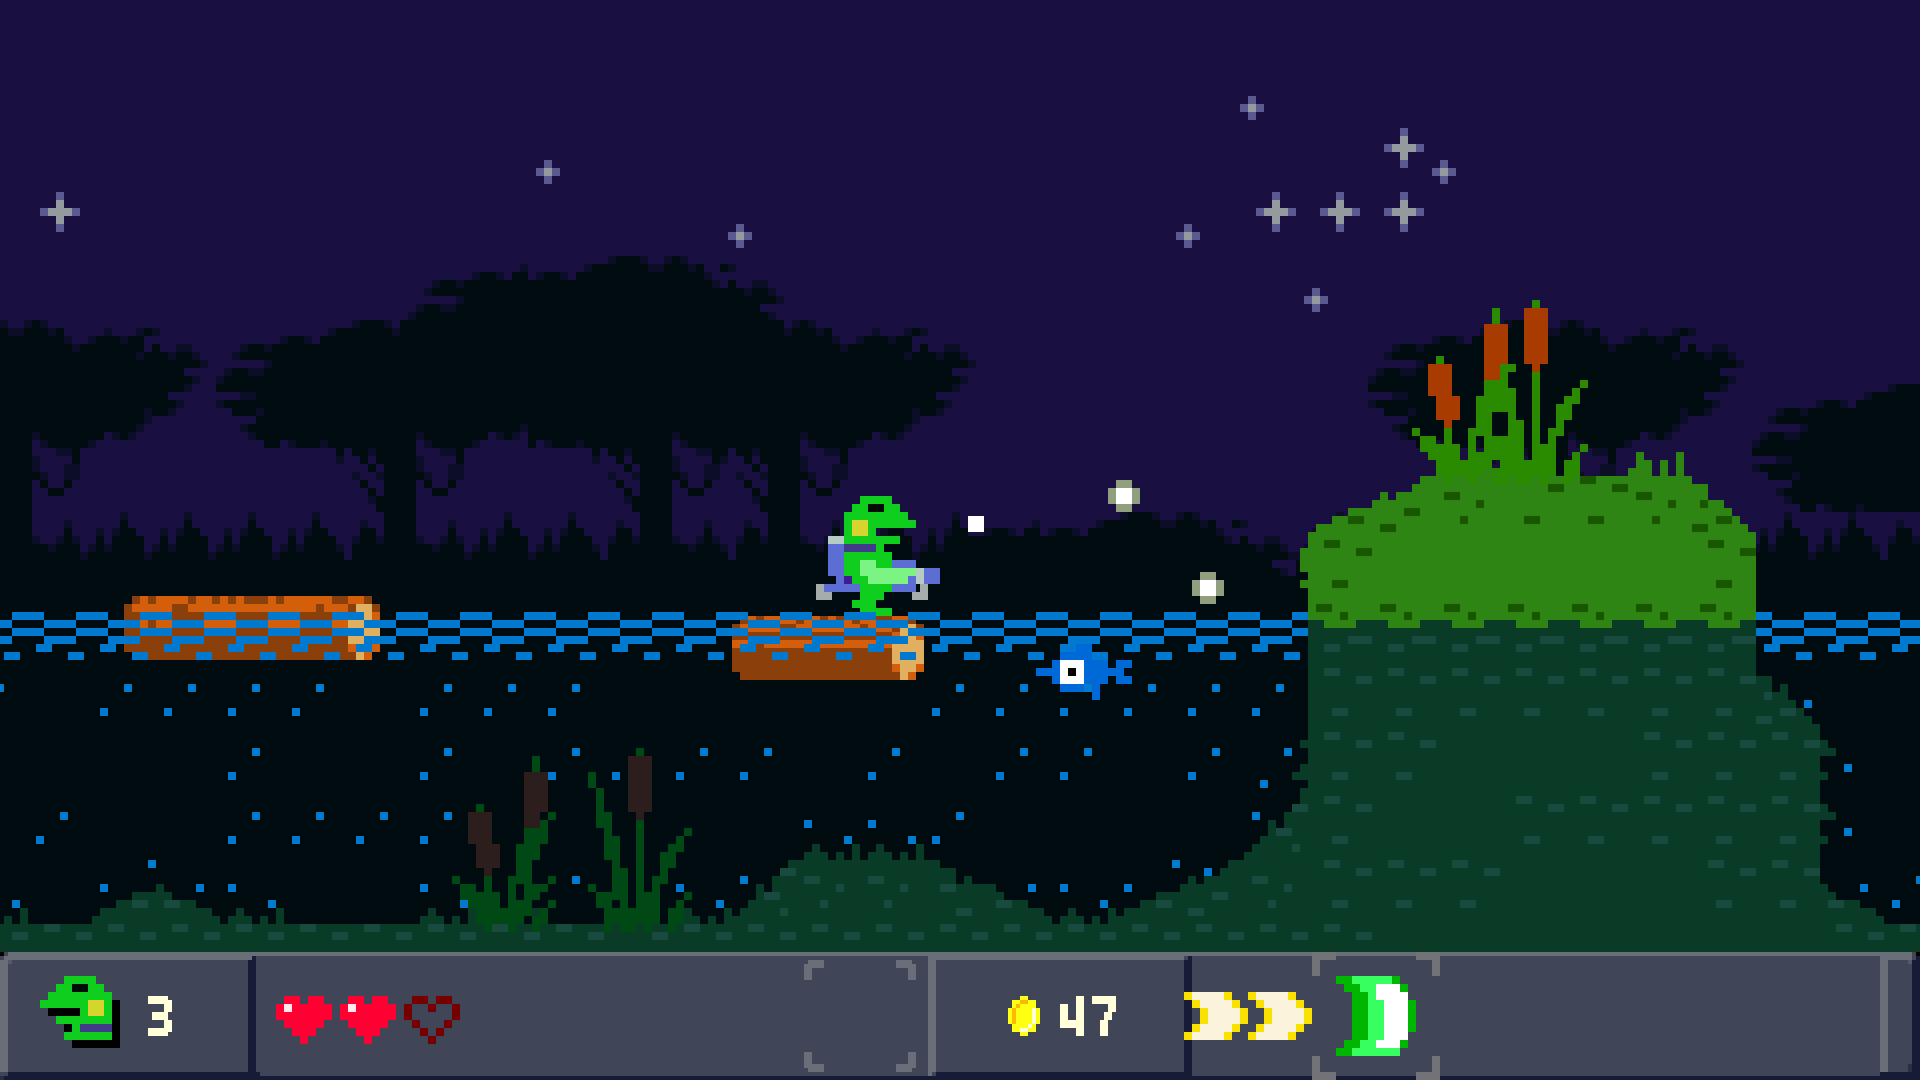 RELEASE] Kero Blaster v1.1 - Port two free spin-off games pink hour &  heaven, update to the latest game version, and fix known bugs : r/vitahacks